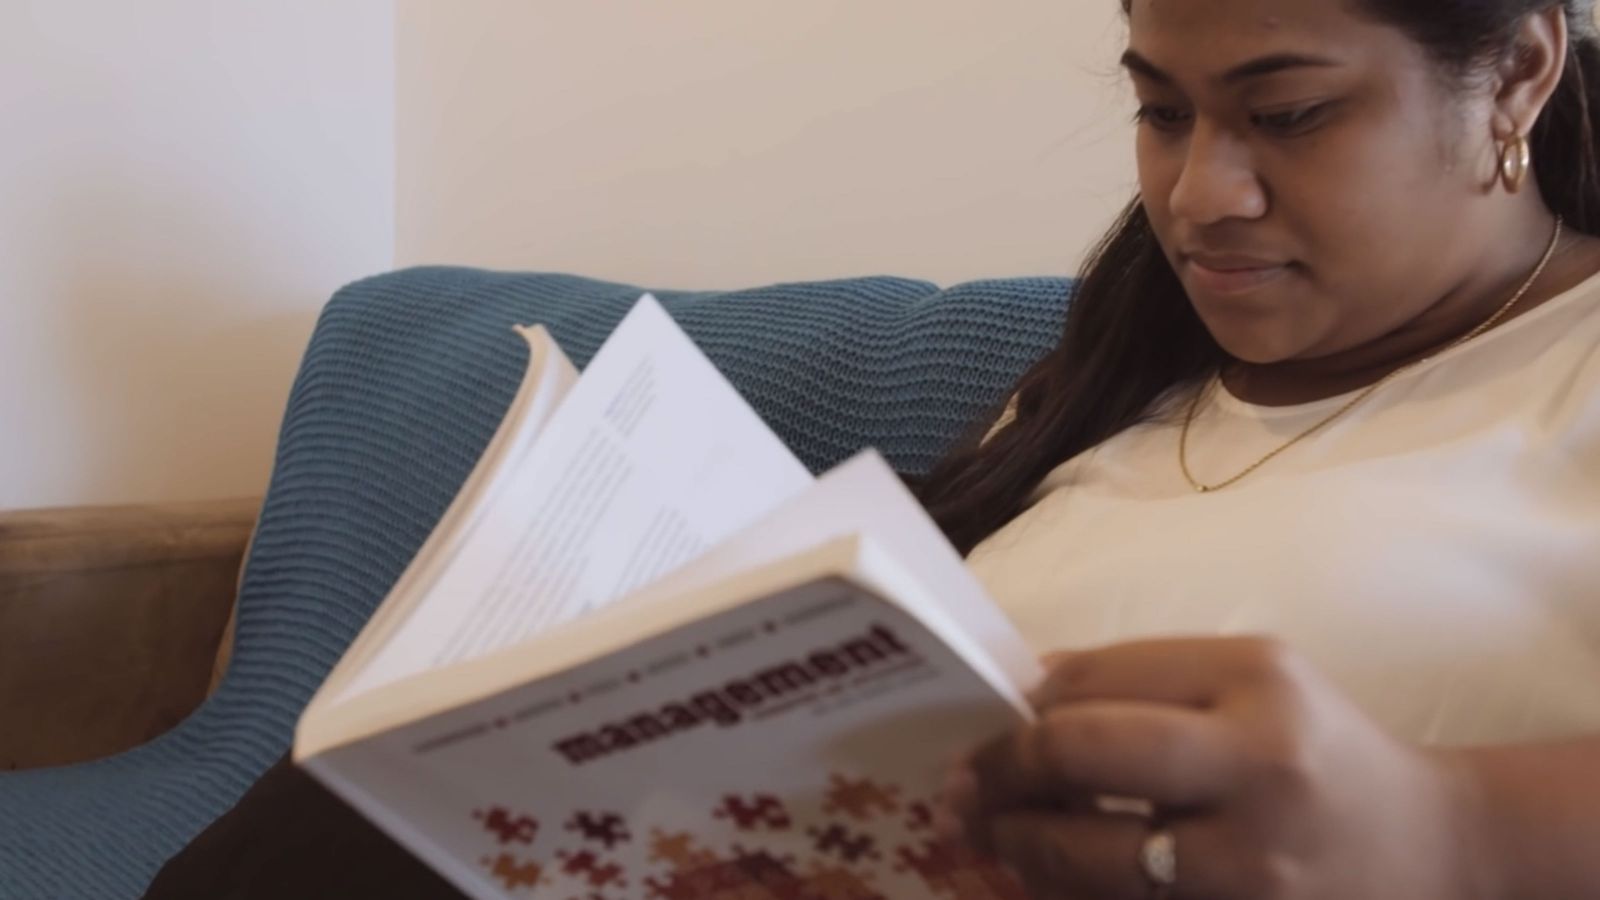 A female student reads a management text book while sitting on a blue couch.